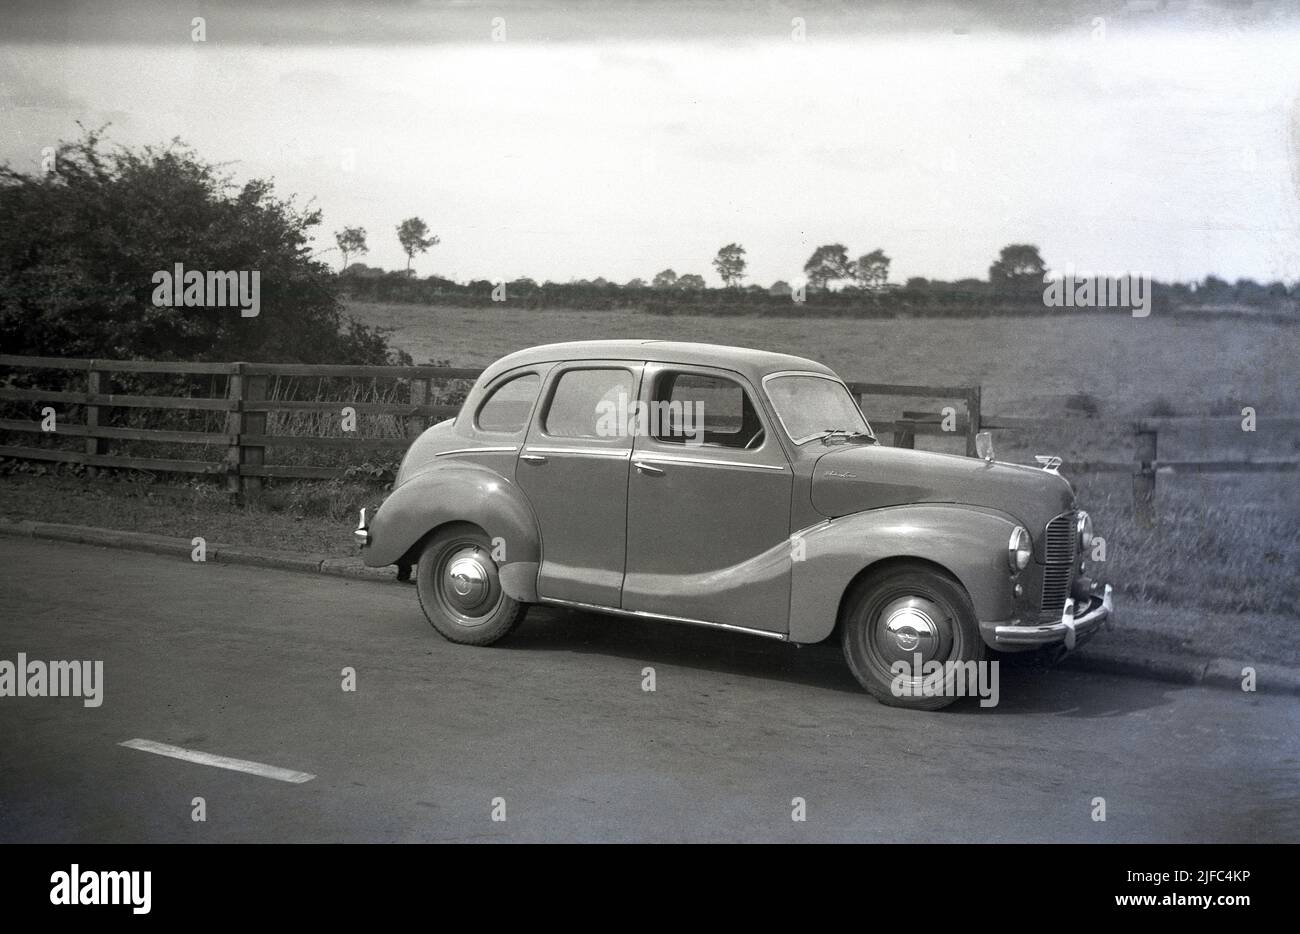 1950s, historical, side view of an Austin car of the era, an A40 Devon saloon parked on a country road, England. Produced between 1947 and 1952, the car was the first post-war saloon made by the Austin Motor Company. With a mix of old and newer technologies, the motorcar was notable for its old style, conservative appearance. Stock Photo